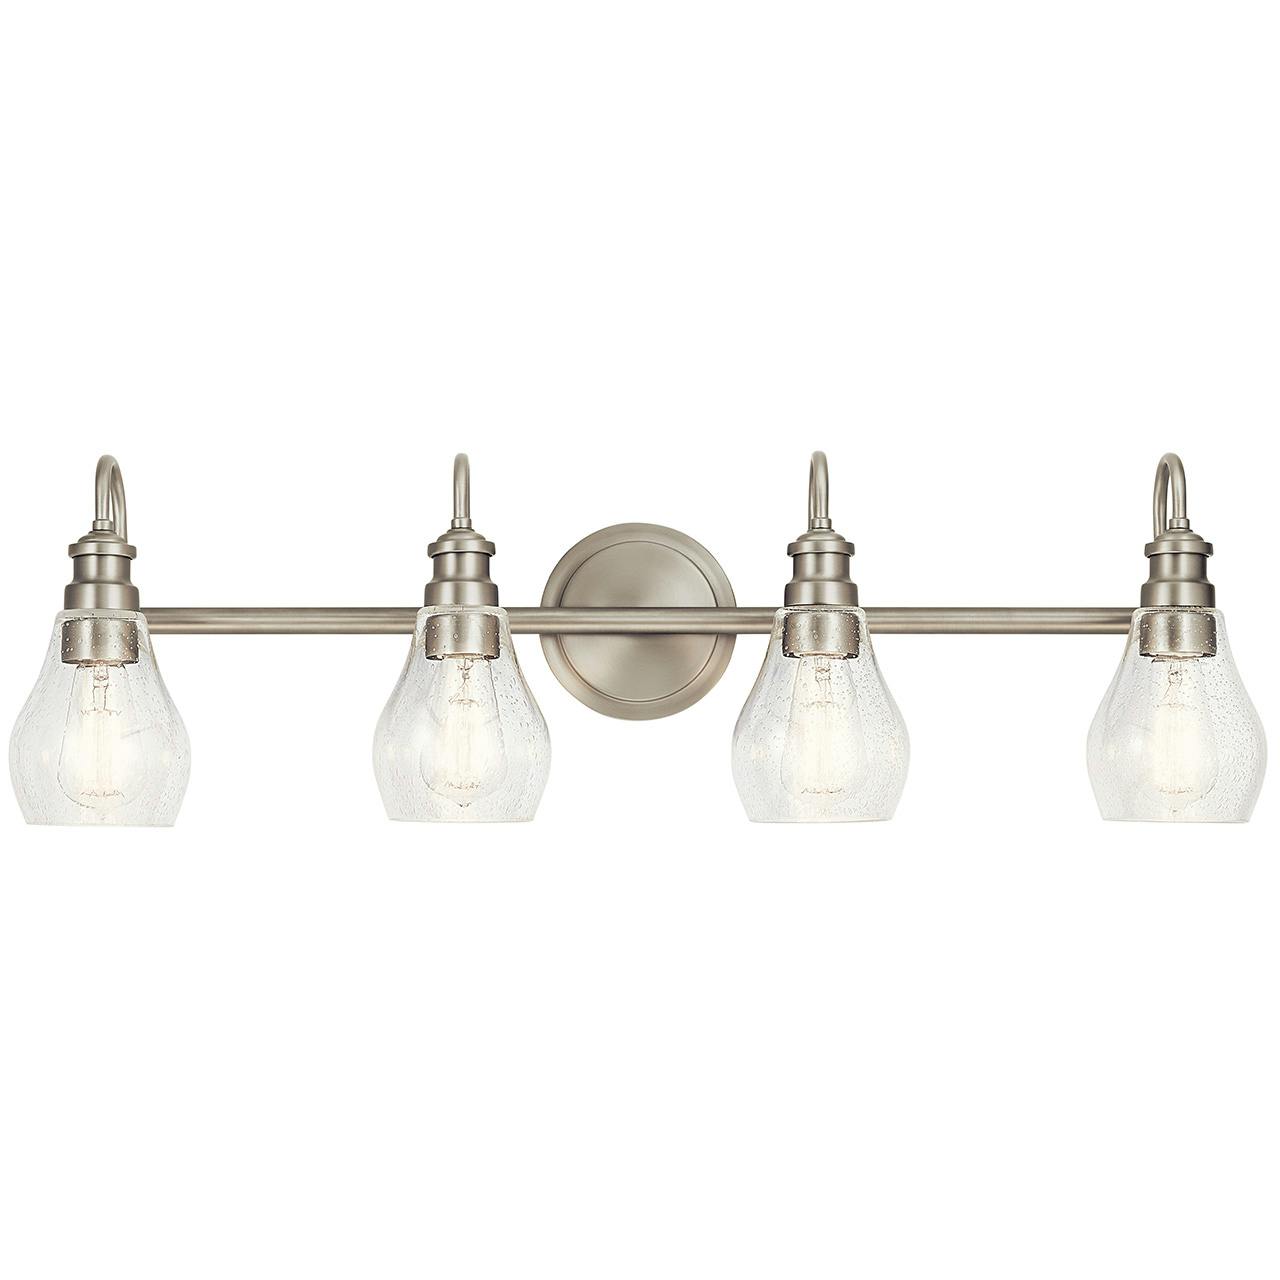 The Greenbrier™ 4 Light Vanity Light Nickel facing down on a white background